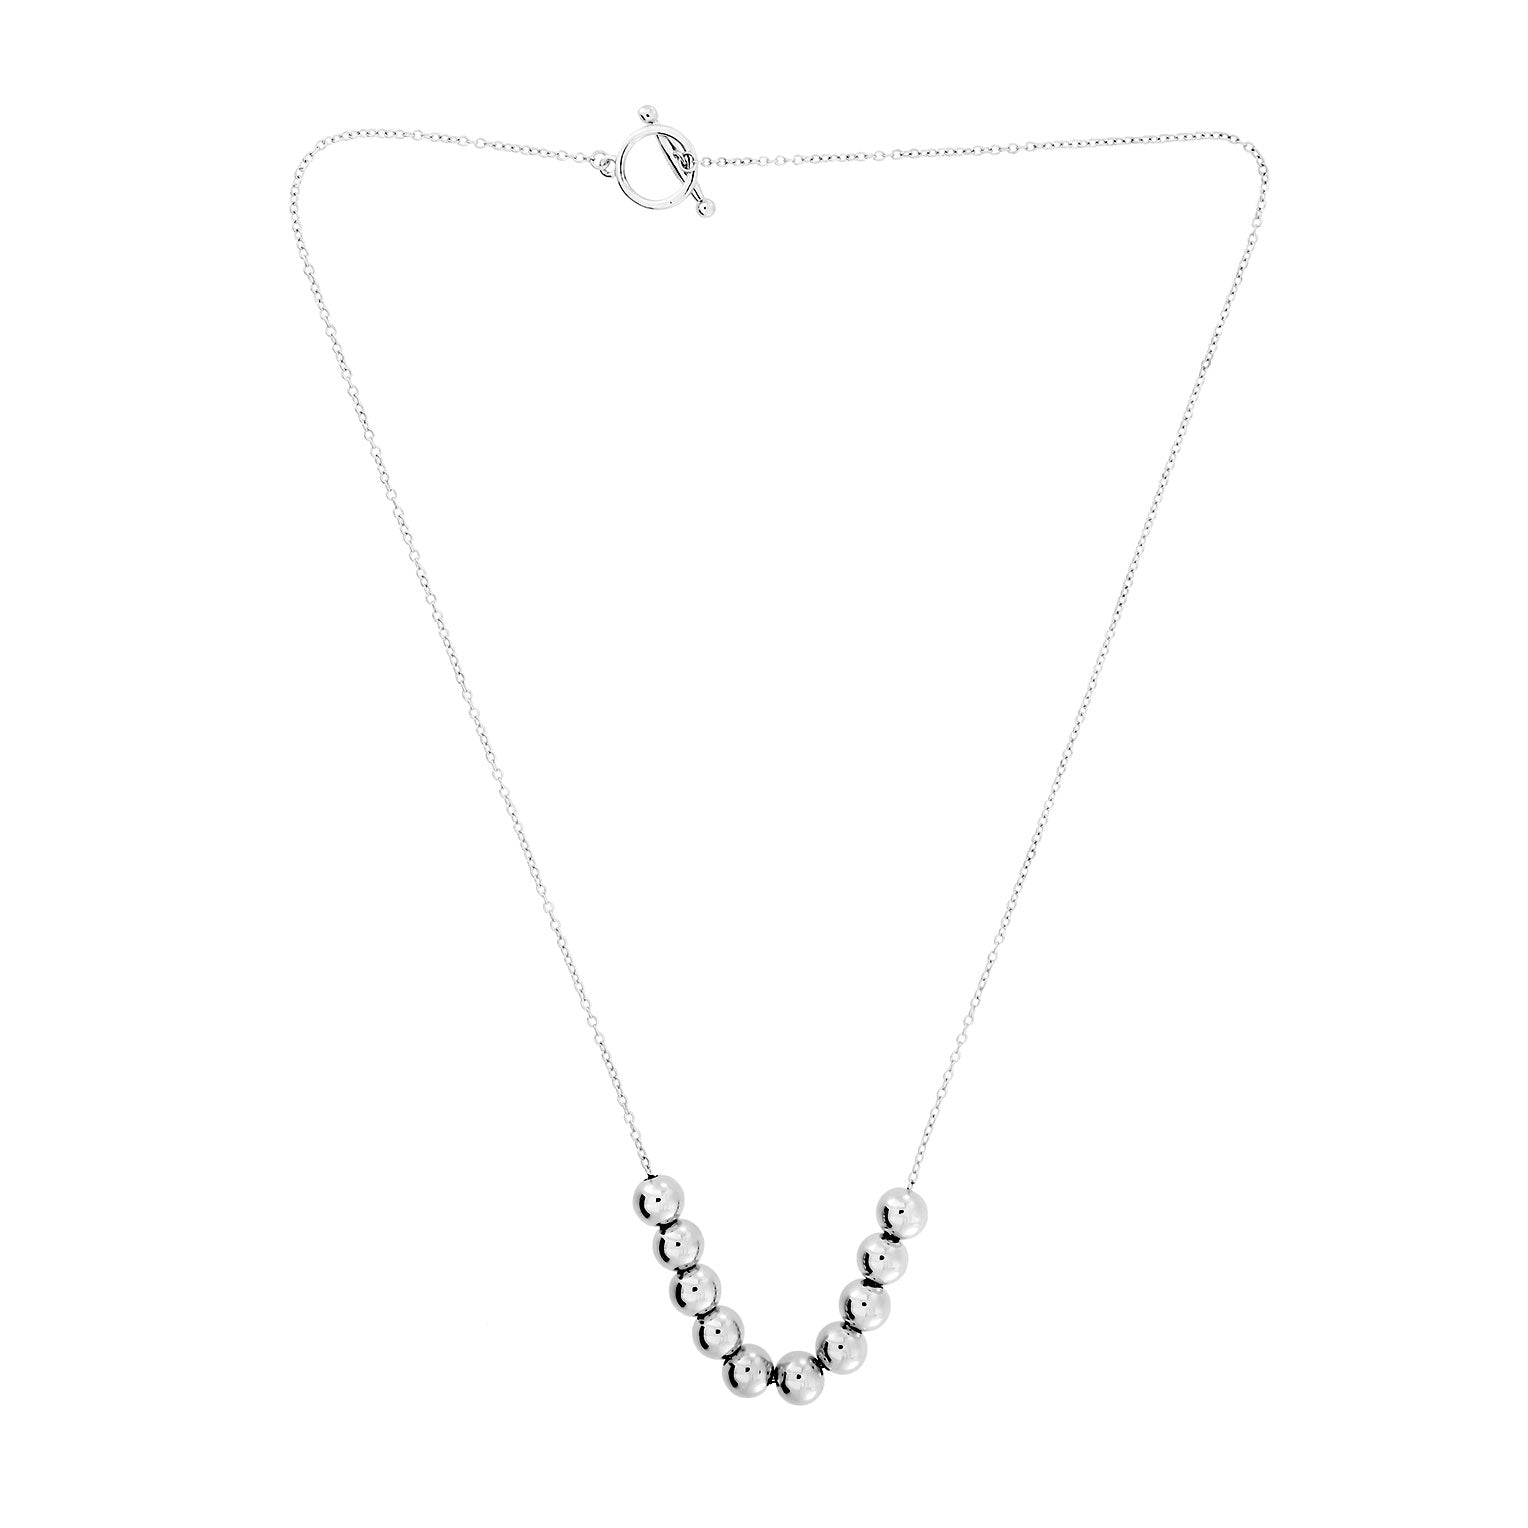 Silver Bead Necklace with T-Bar